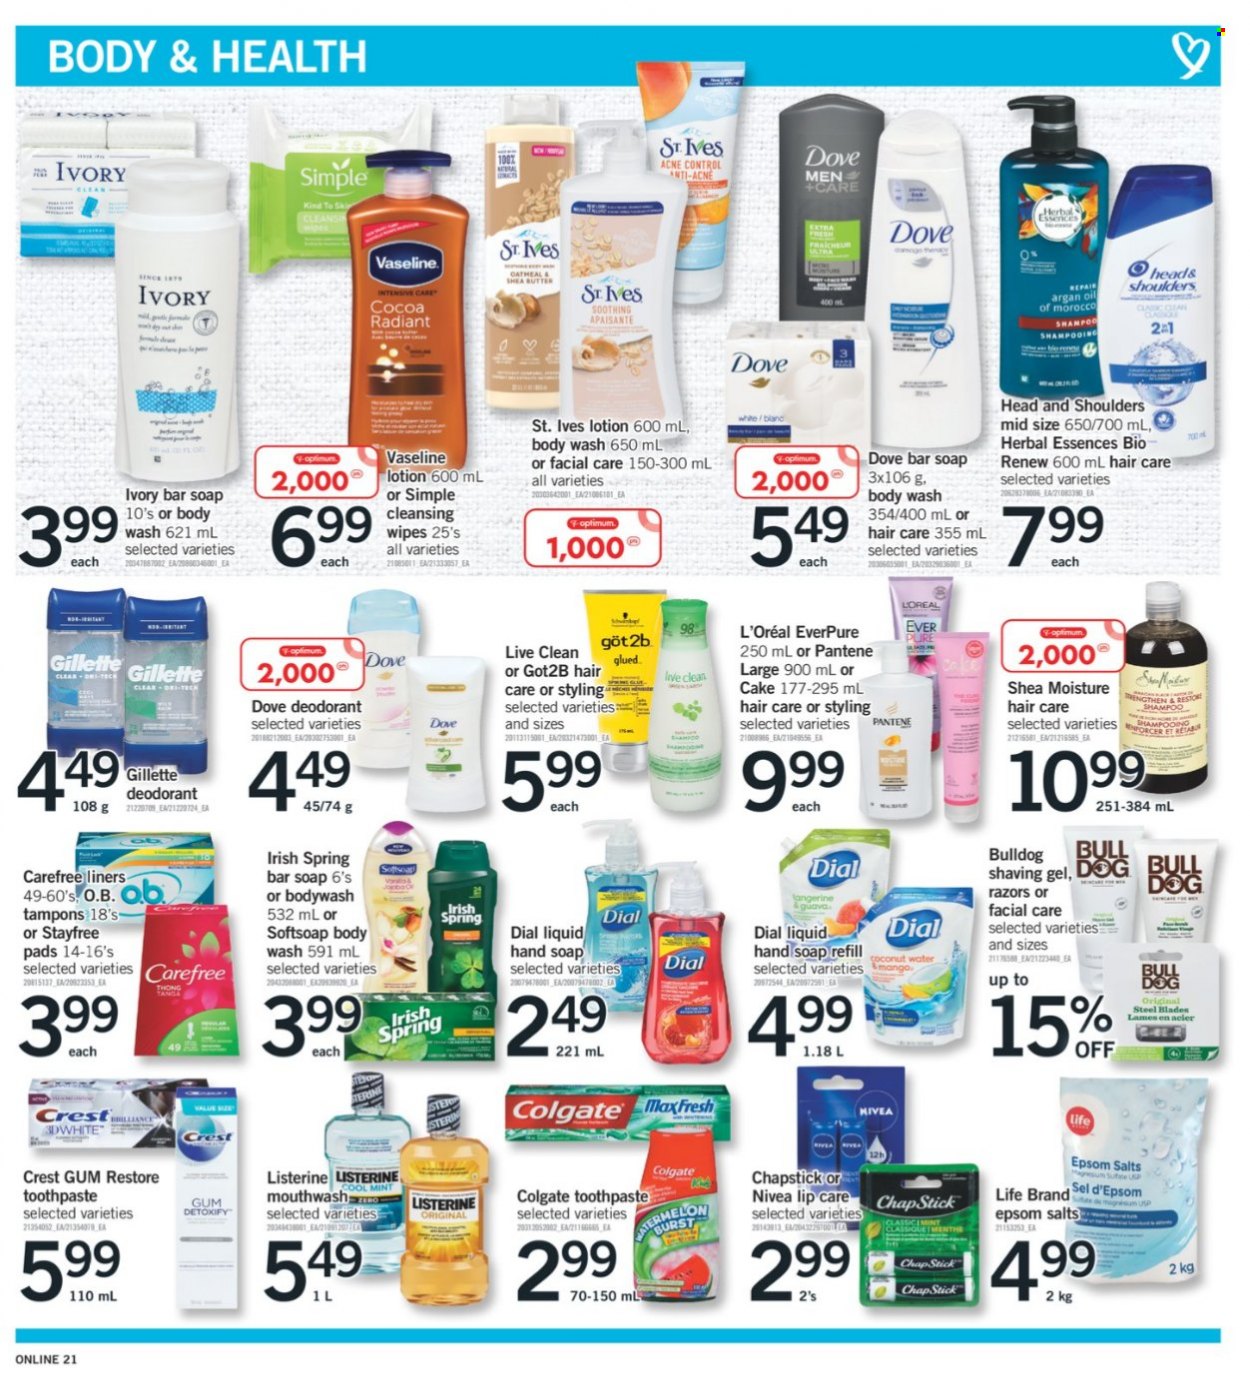 thumbnail - Fortinos Flyer - September 23, 2021 - September 29, 2021 - Sales products - cake, mango, coconut water, cleansing wipes, wipes, body wash, Softsoap, hand soap, Vaseline, soap bar, Dial, soap, toothpaste, Crest, Stayfree, Carefree, tampons, L’Oréal, Herbal Essences, body lotion, shea butter, anti-perspirant, Optimum, argan oil, Dove, Colgate, Gillette, Listerine, Head & Shoulders, Pantene, Nivea, deodorant. Page 12.